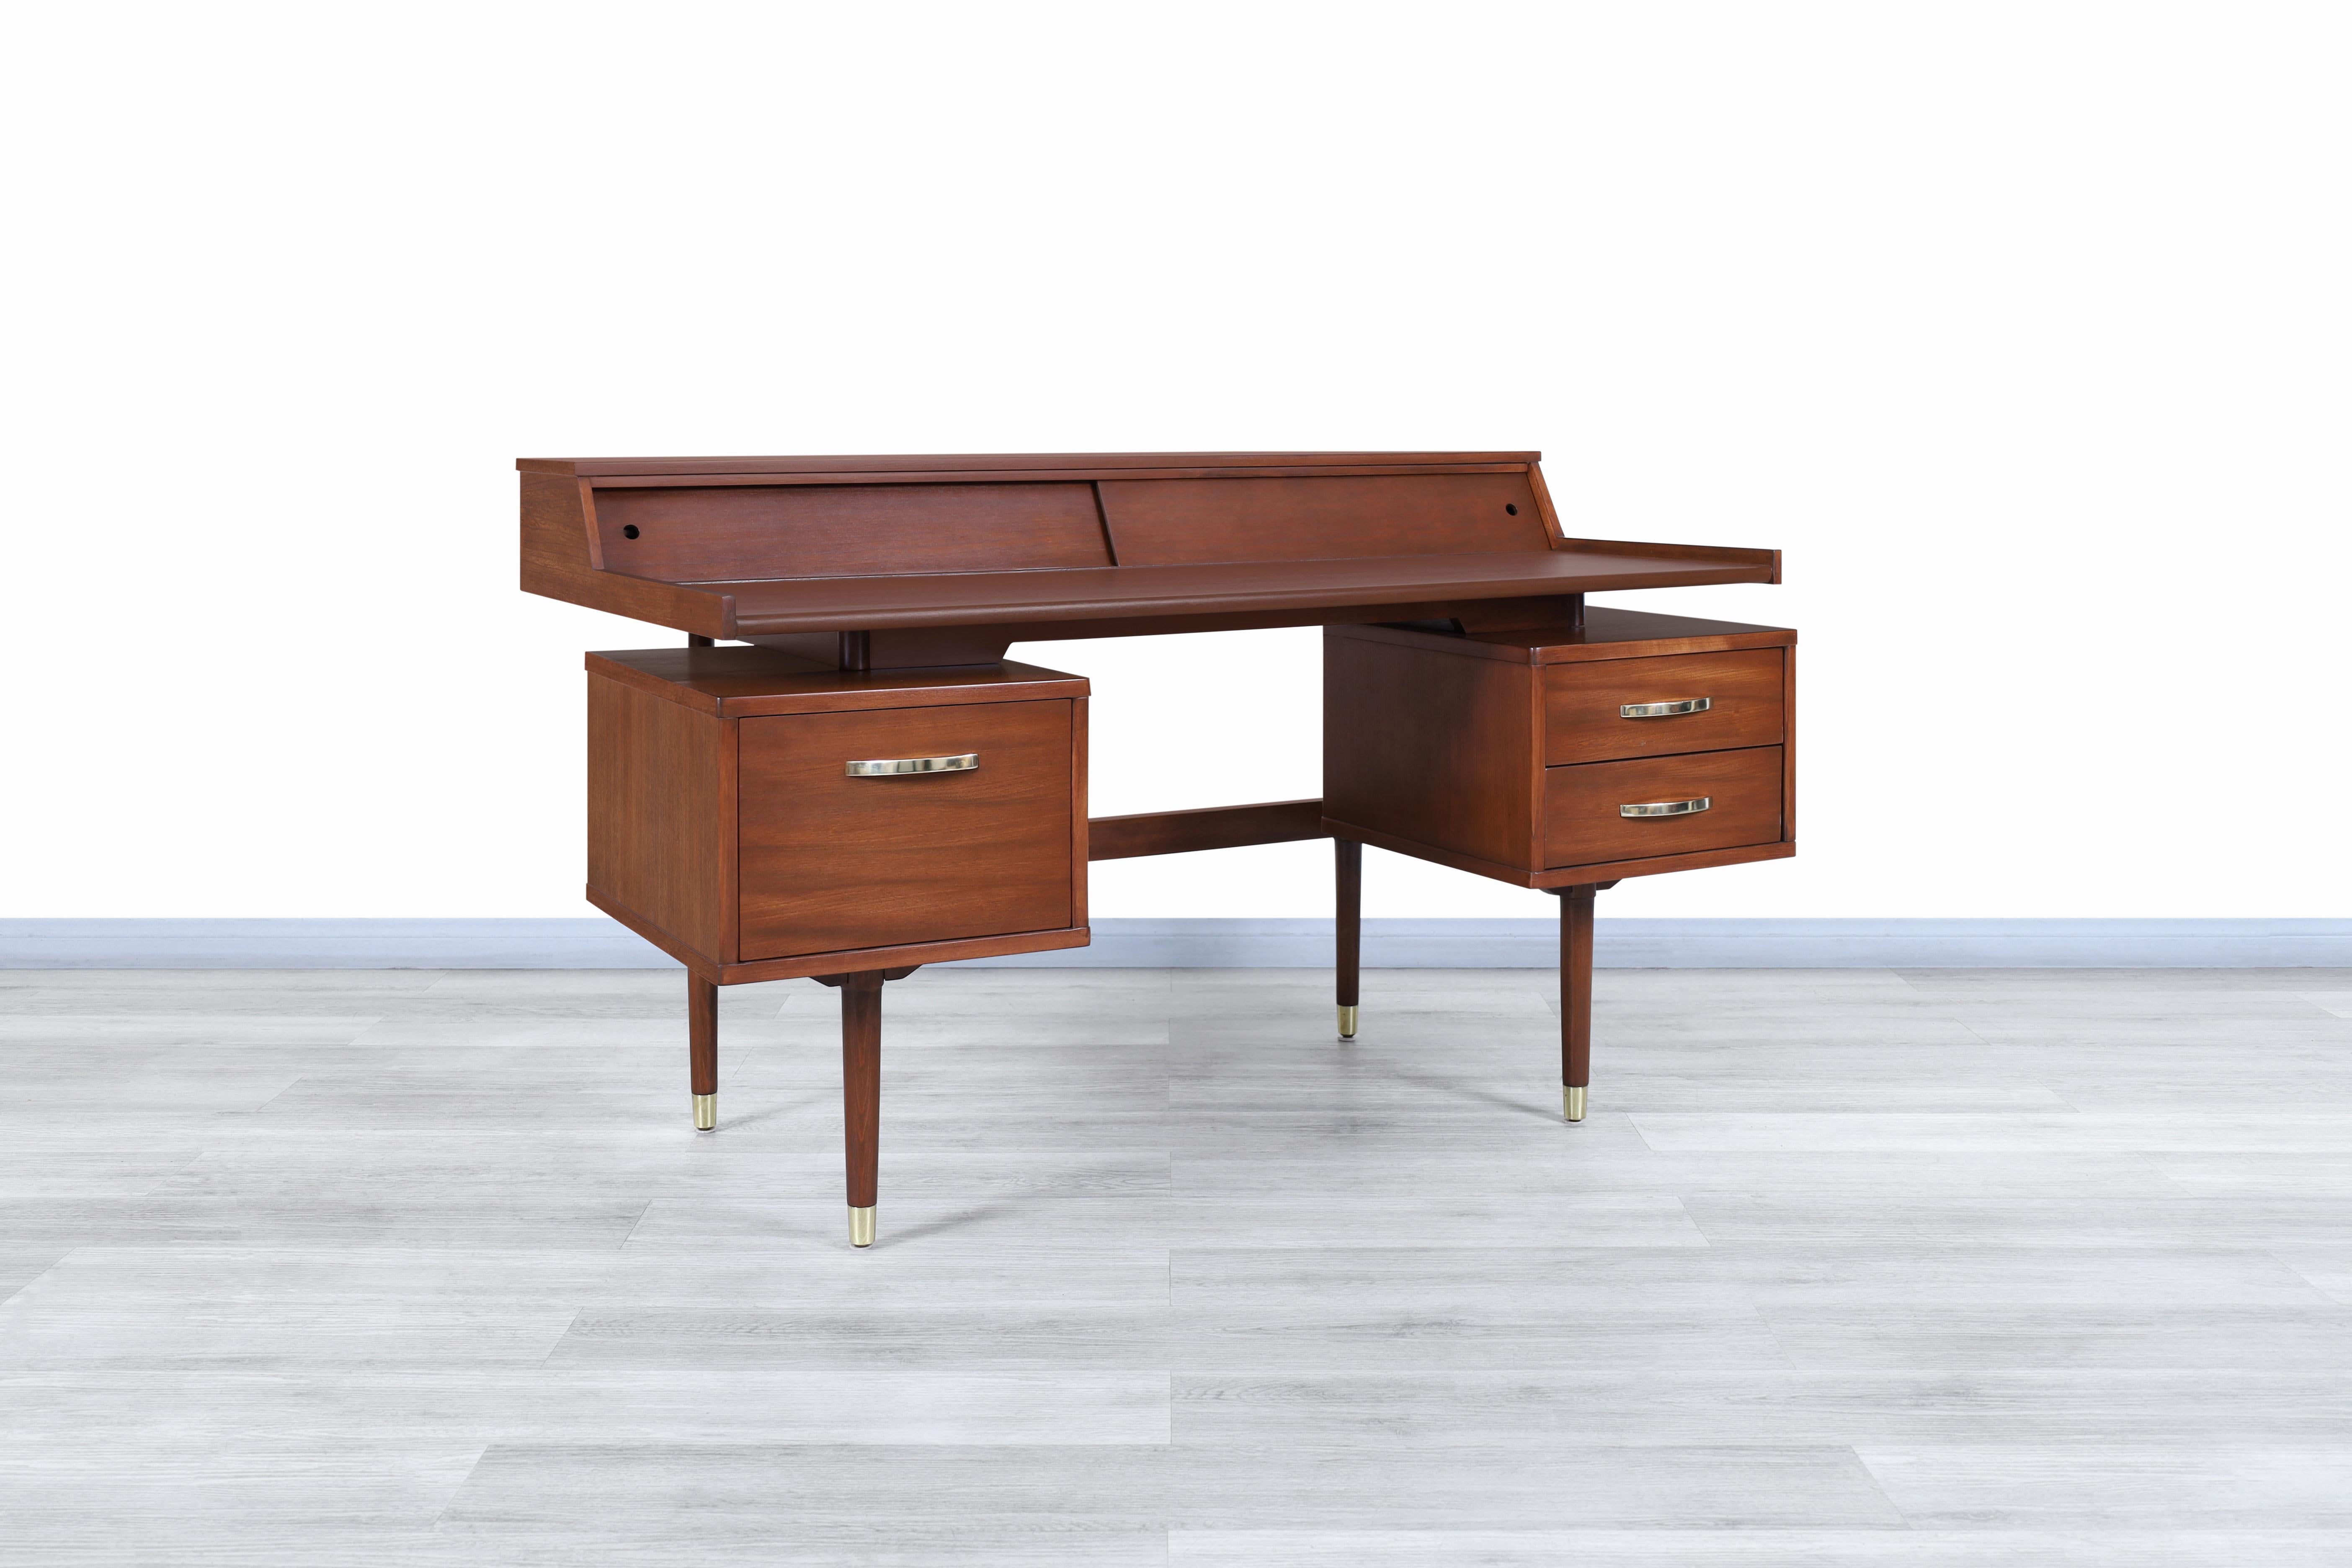 Wonderful vintage “Biscayne” floating top walnut desk by Drexel and manufactured in the United States, circa 1960s. This desk has been built from the highest quality walnut wood and stands out for its versatile and innovative design. This iconic